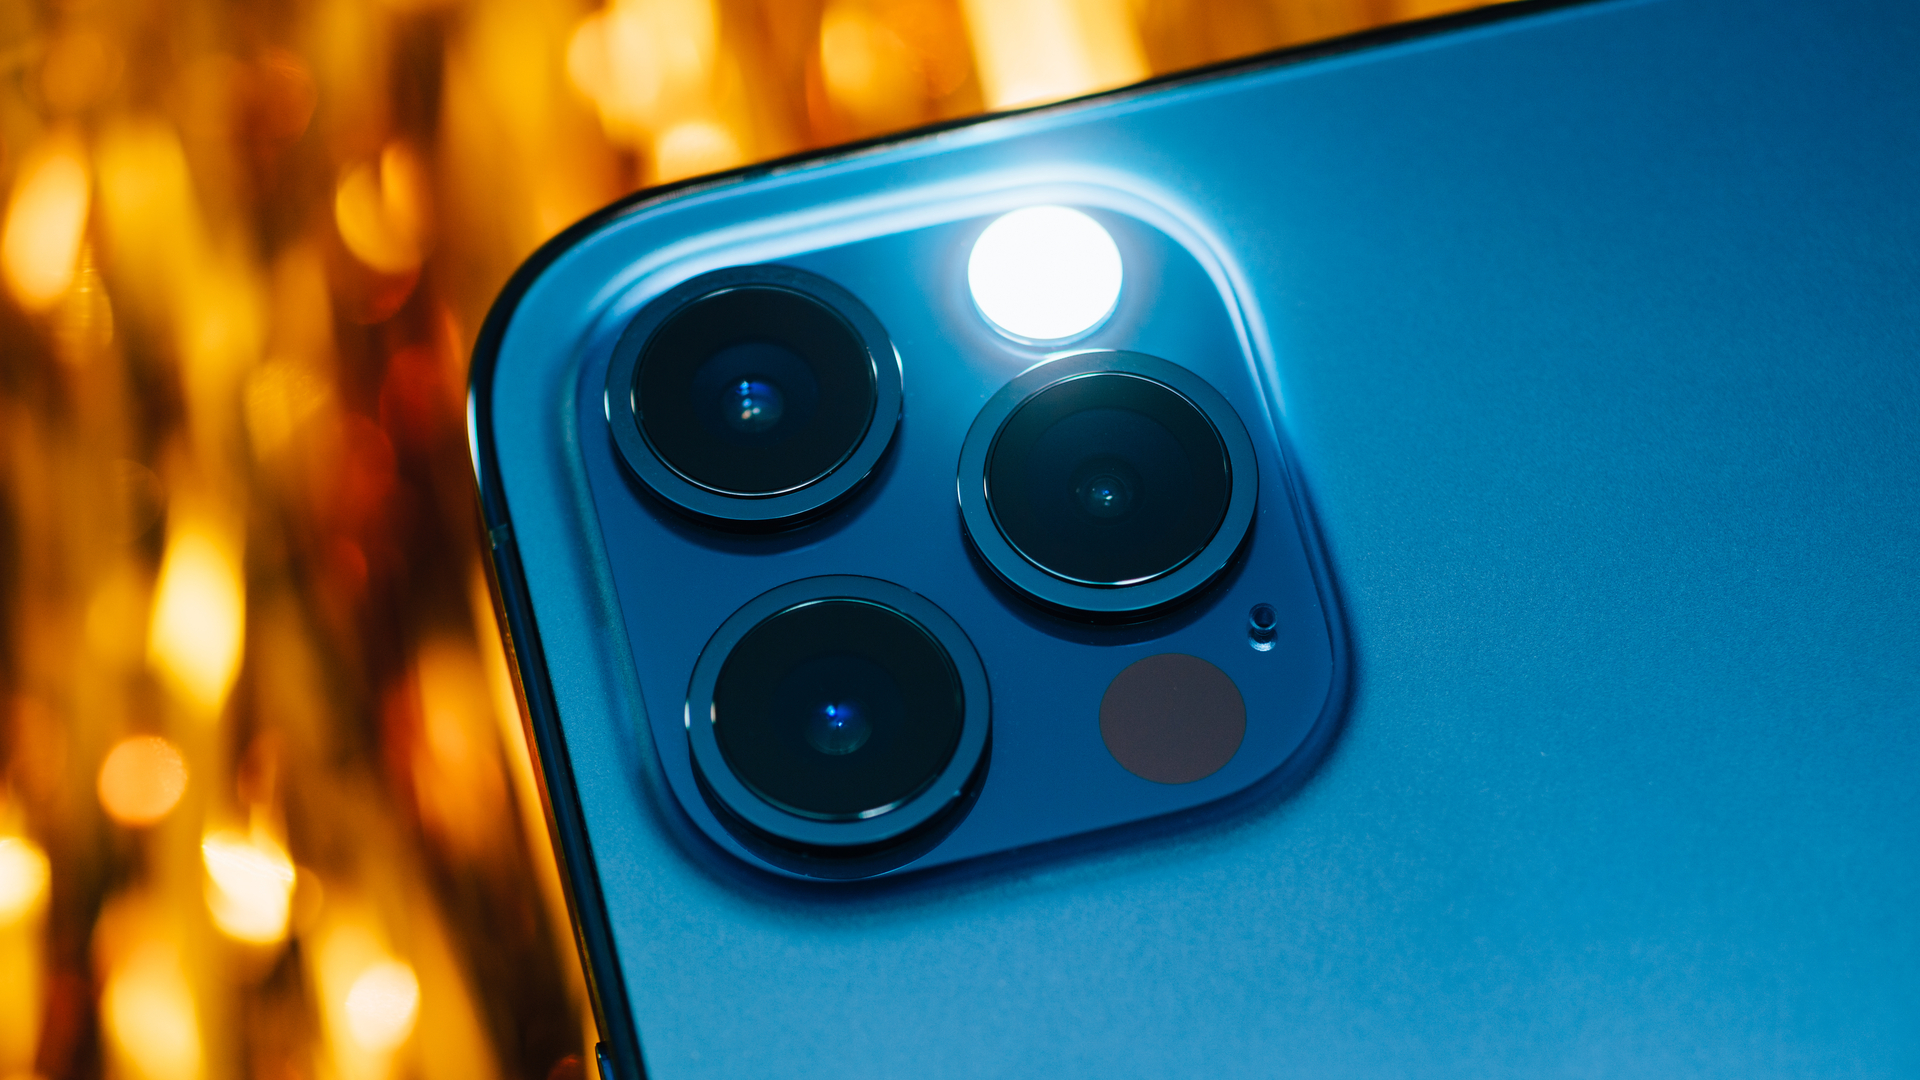 iPhone 13 Pro camera array with LED flash activated demonstrating a hidden iPhone feature